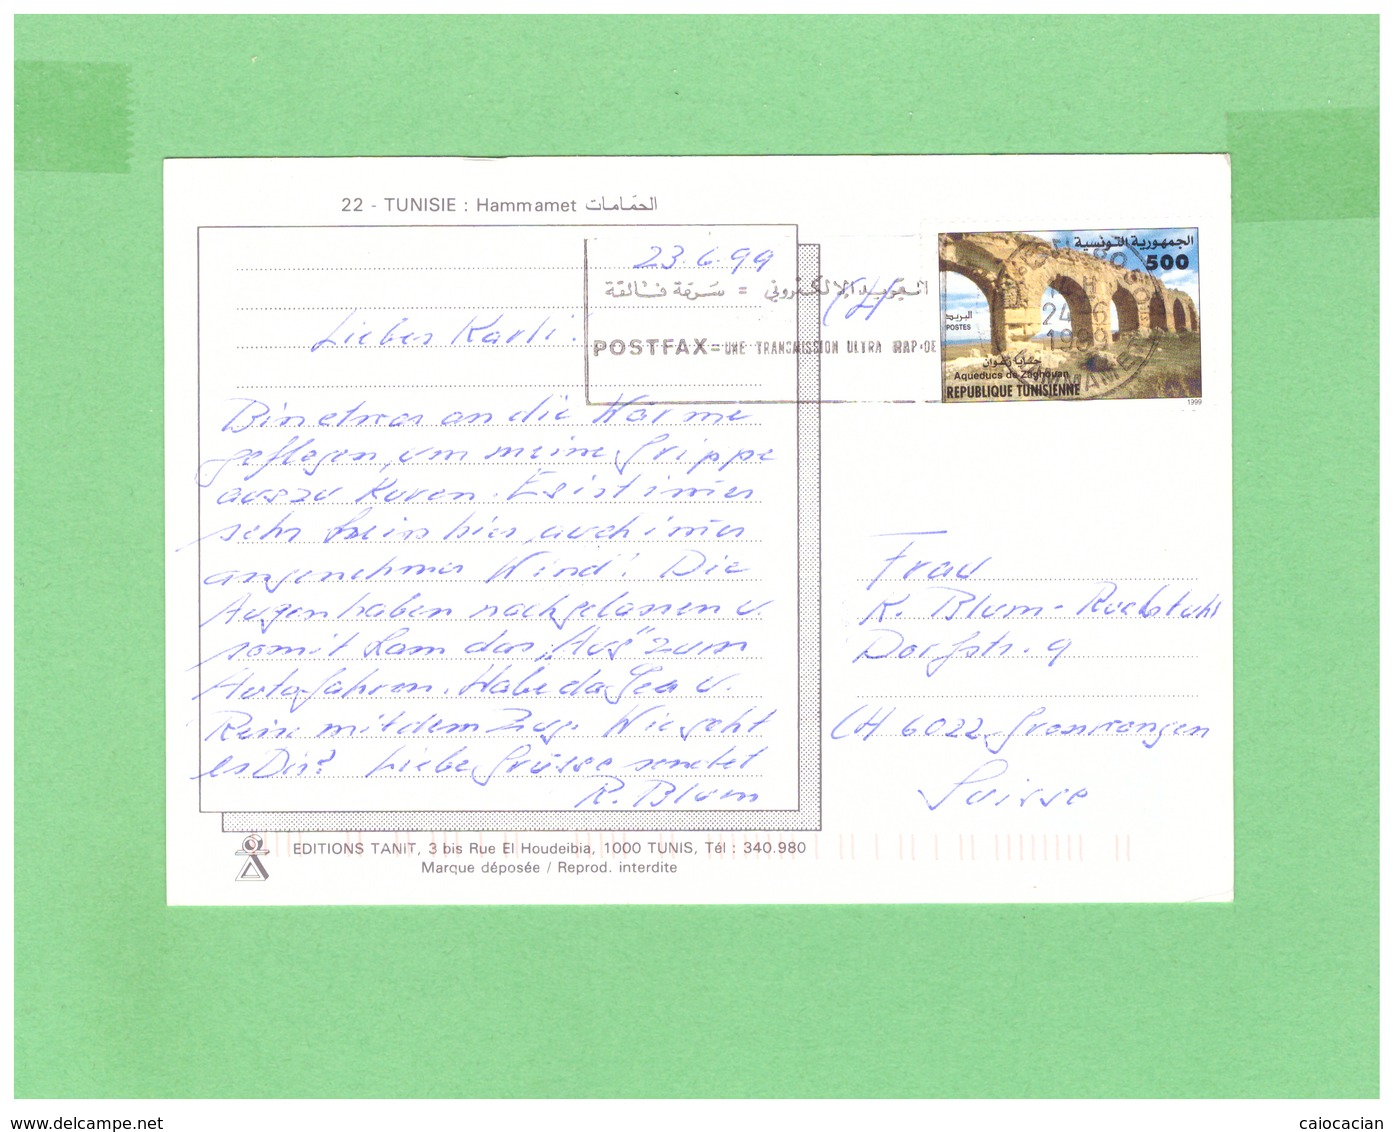 1999 TUNISIE POSTCARD WITH 1 STAMP TO SWISS - Tunisia (1956-...)